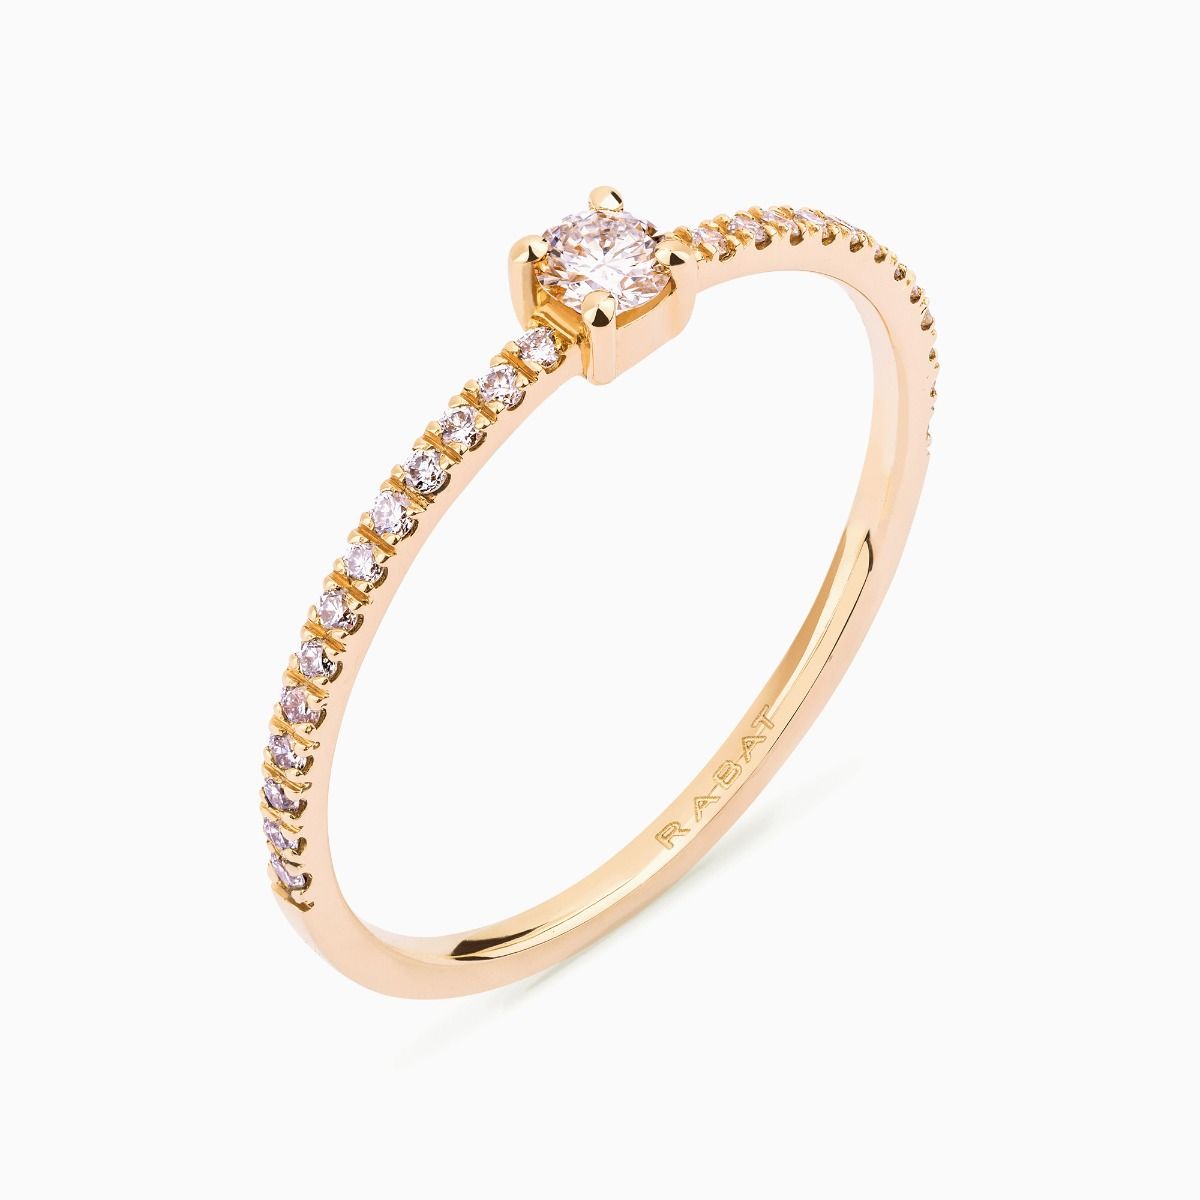 Poetic Thin solitaire engagement ring with diamonds pavé